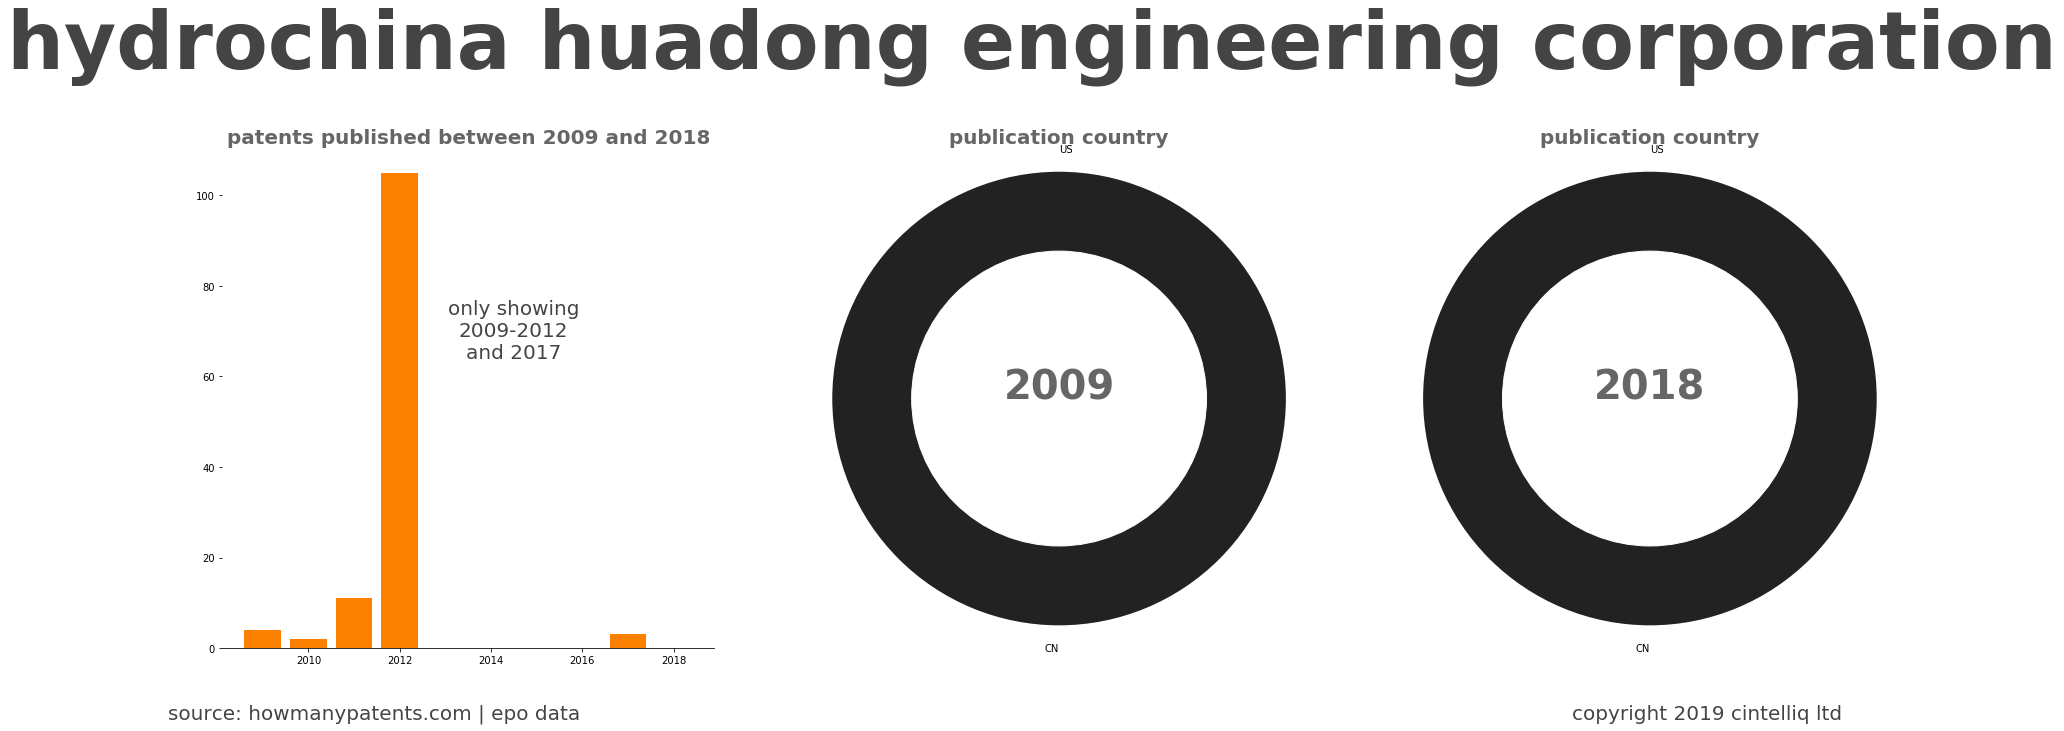 summary of patents for Hydrochina Huadong Engineering Corporation